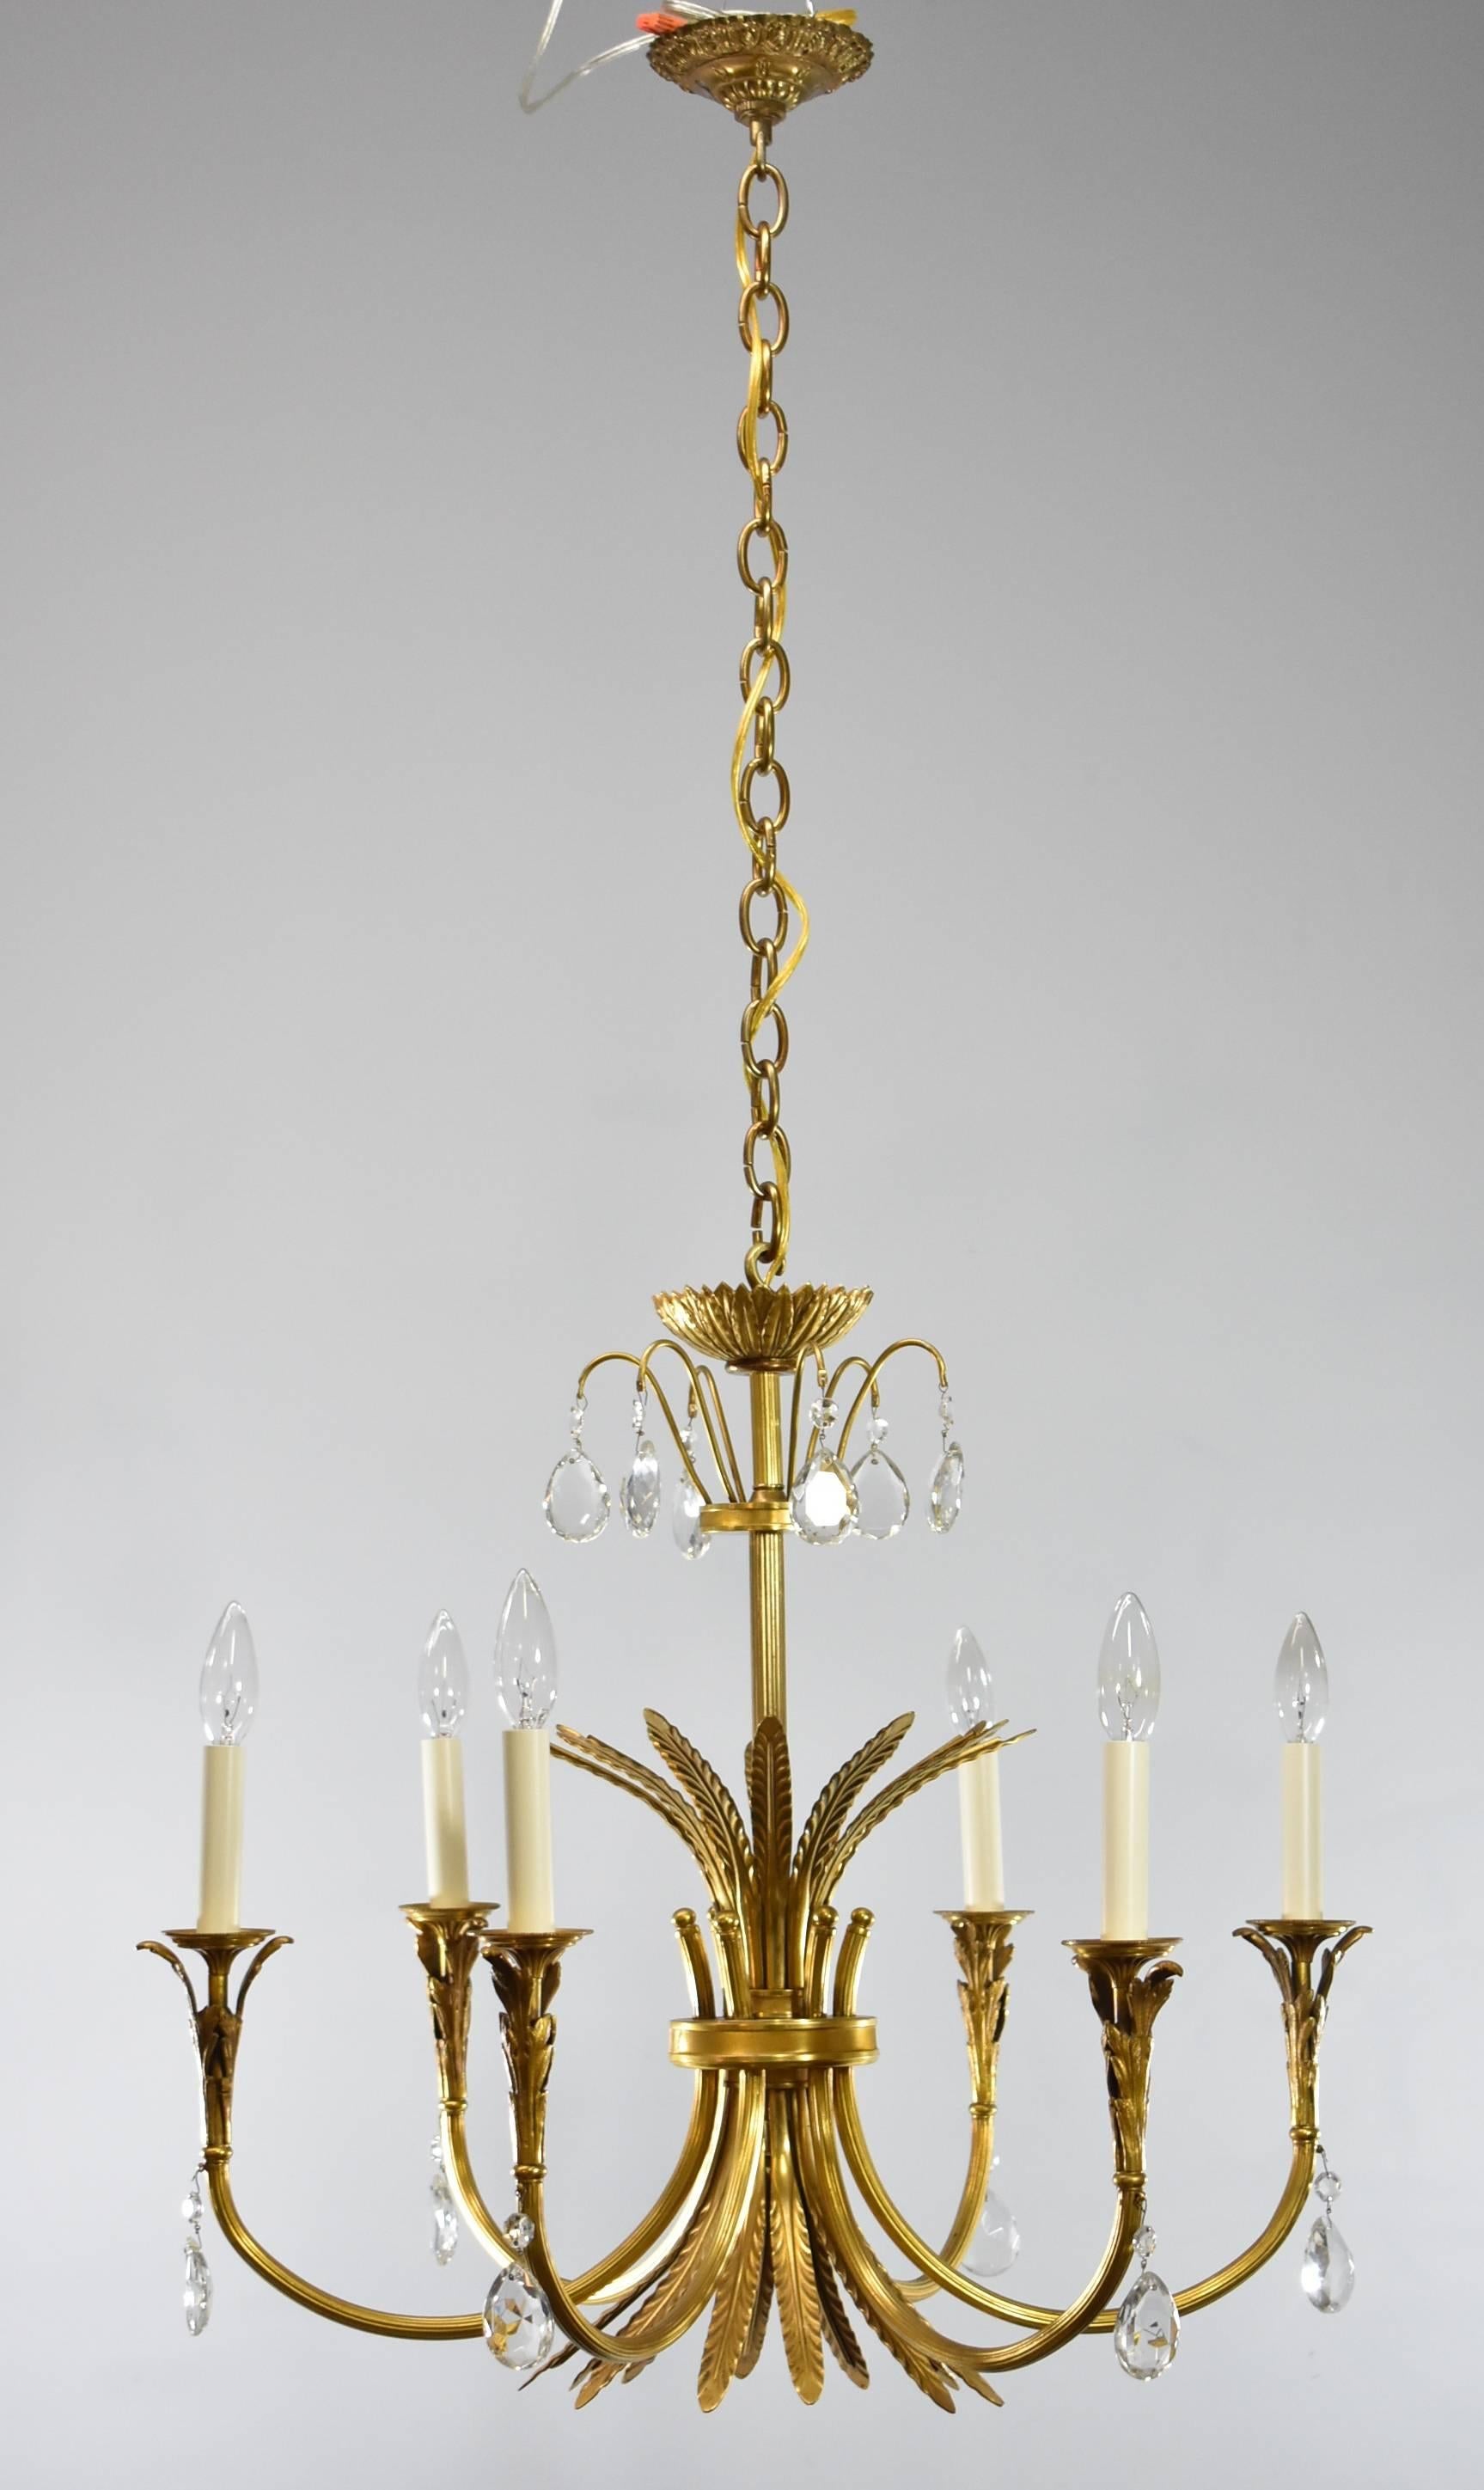 A beautiful Italian Neoclassic style six-arm brass chandelier with crystal accents. The central sheaf design body has six arms with leaf detailing at brass bobeche holding white candlesticks. At the top is a crown of featuring six crystal drop